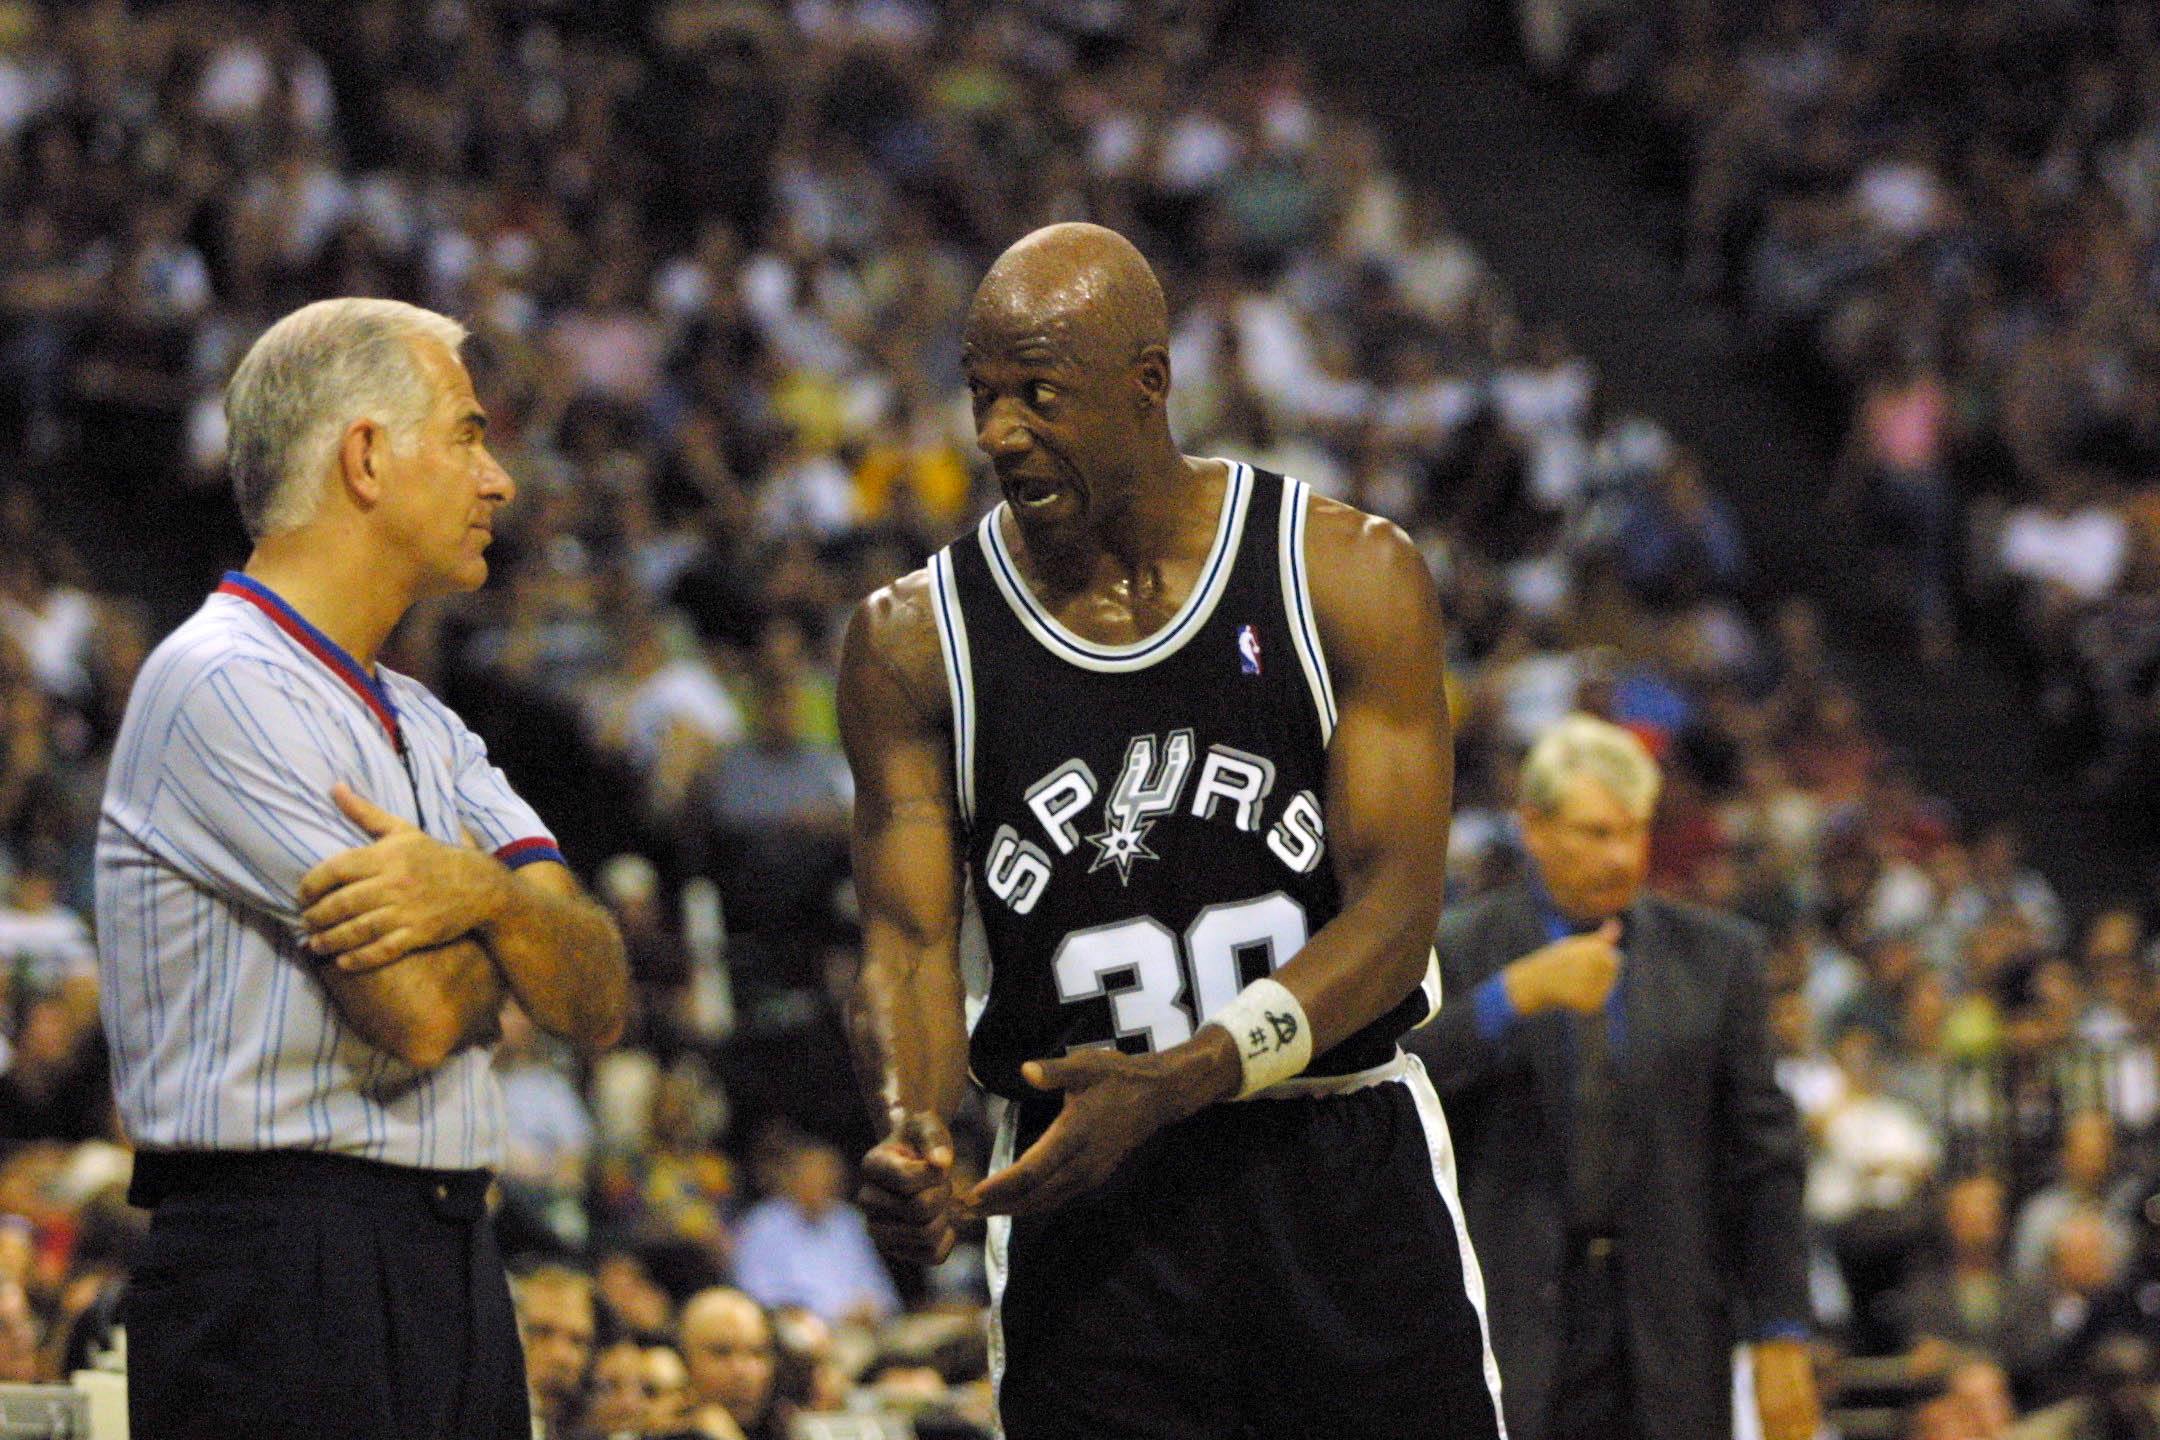 Veteran point guard Terry Porter argues his case with a ref.